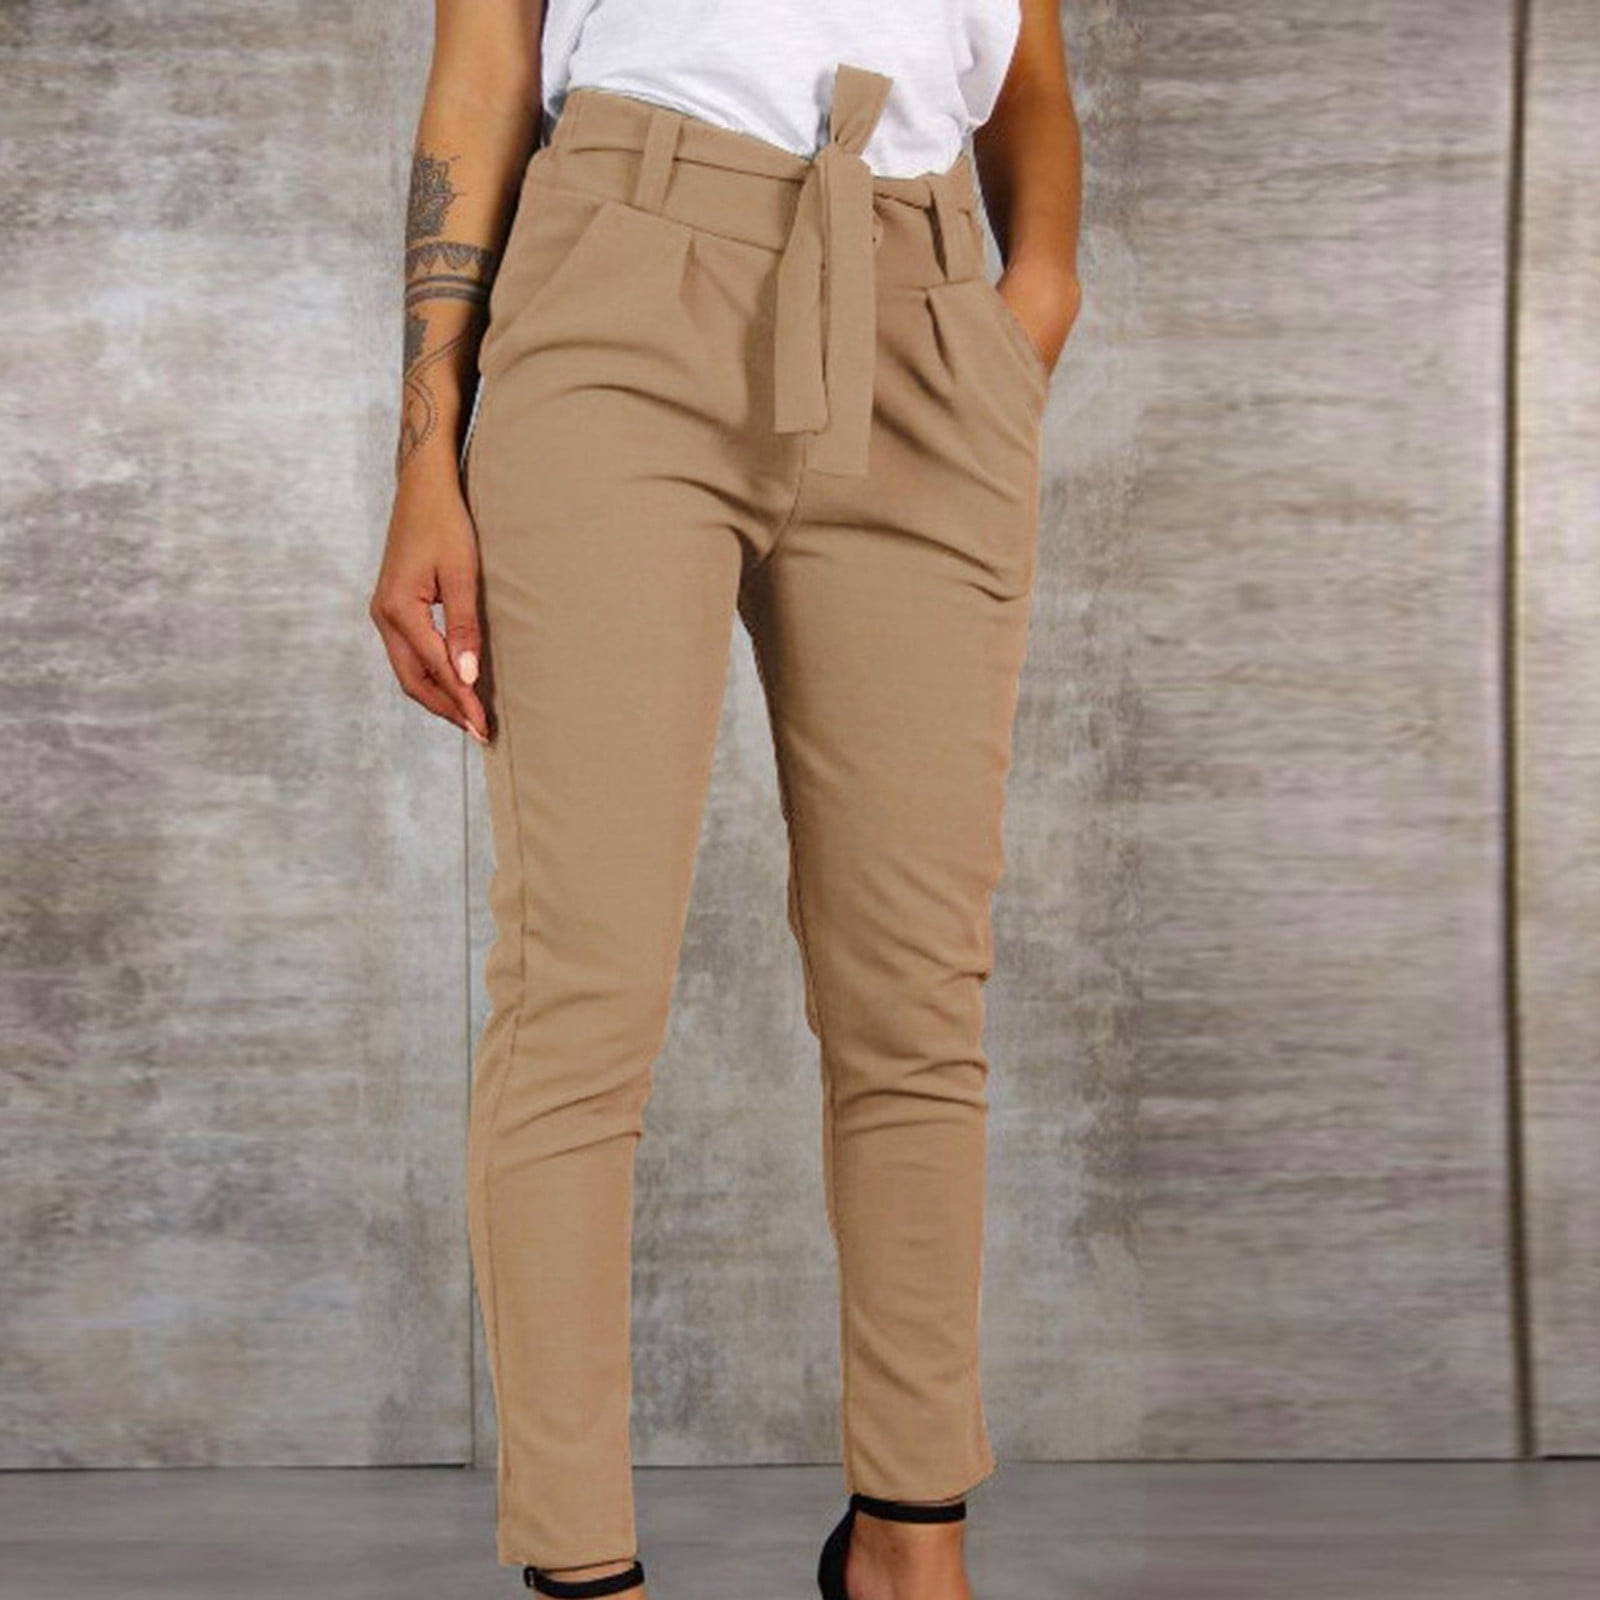 Js High Waist Jeans Khaki Pants for woman Babae Maong Office suit Skinny  Jeans